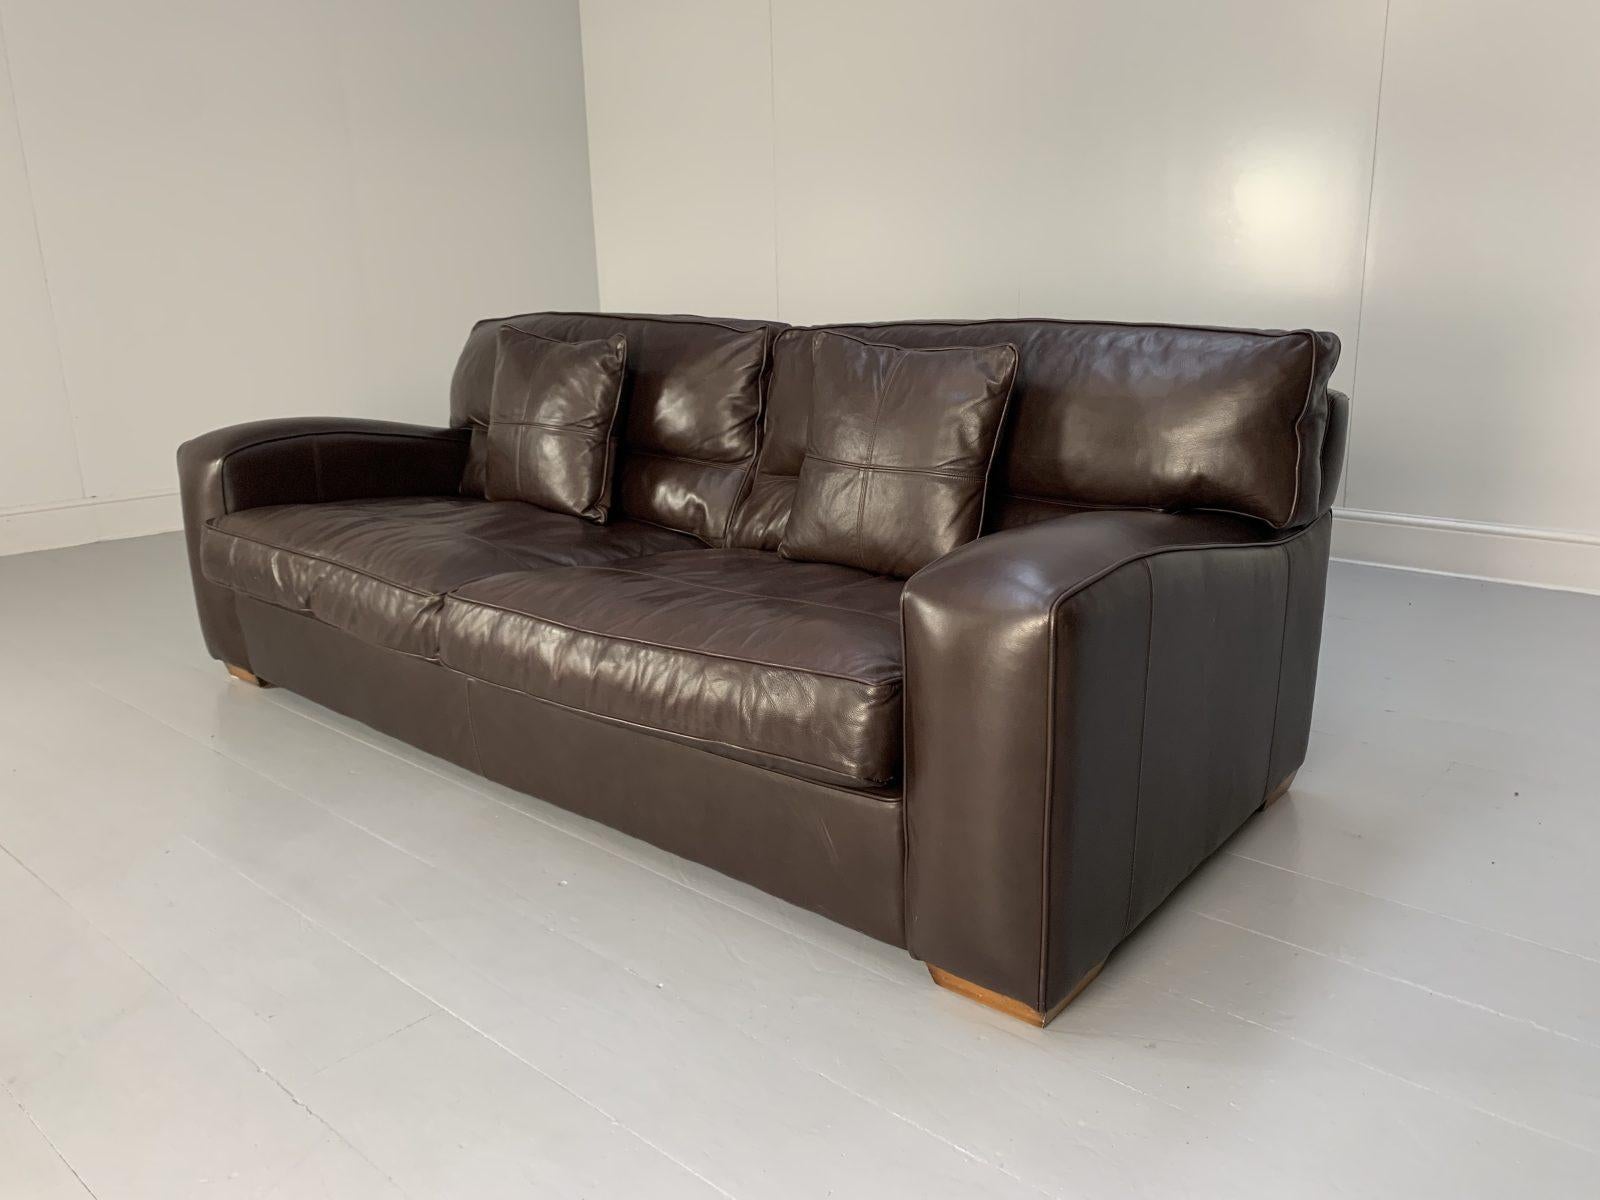 Duresta “Panther” Grand 3-Seat Sofa, in Dark Brown Leather For Sale 4